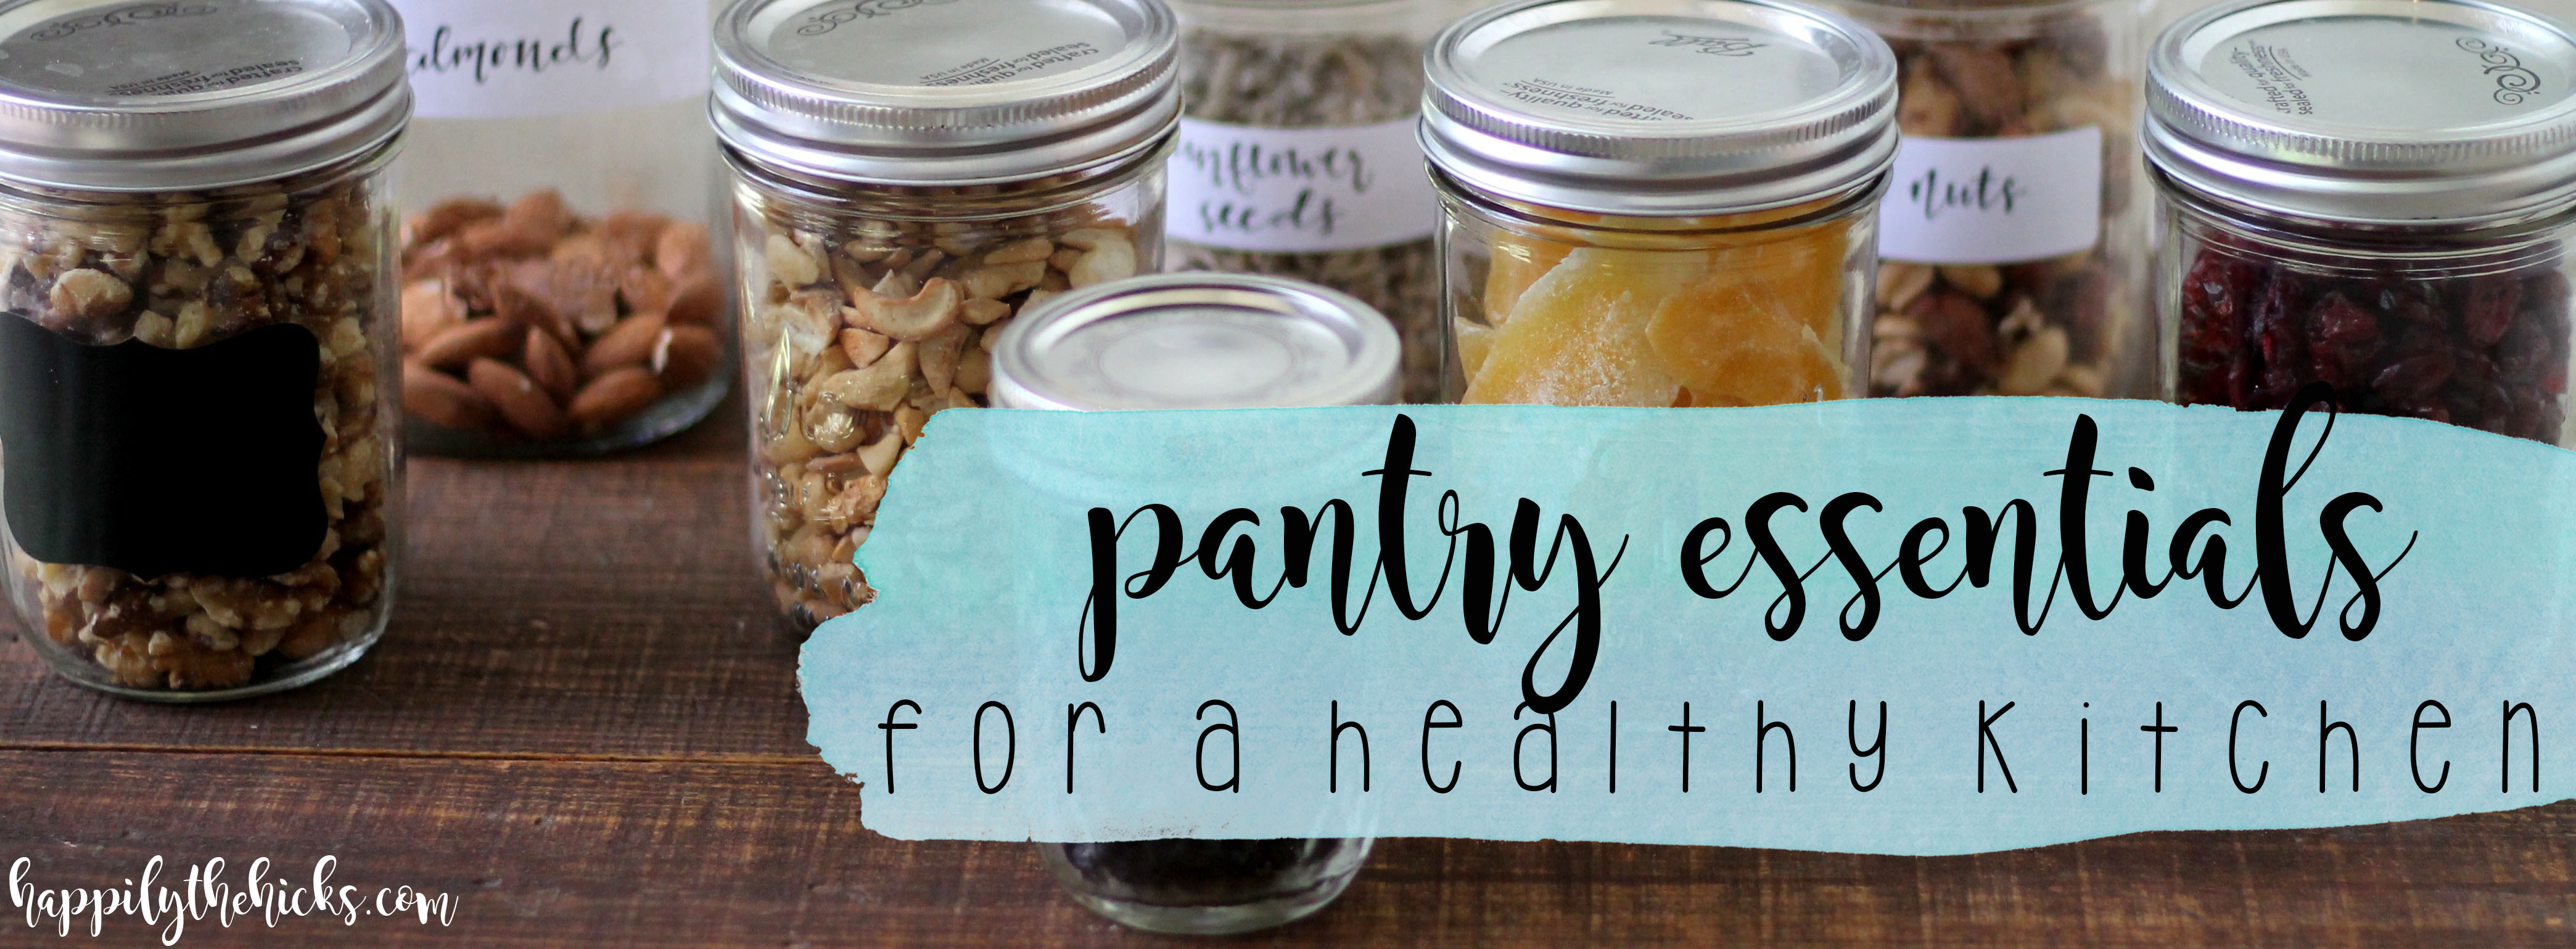 Pantry Essentials for a Healthy Kitchen